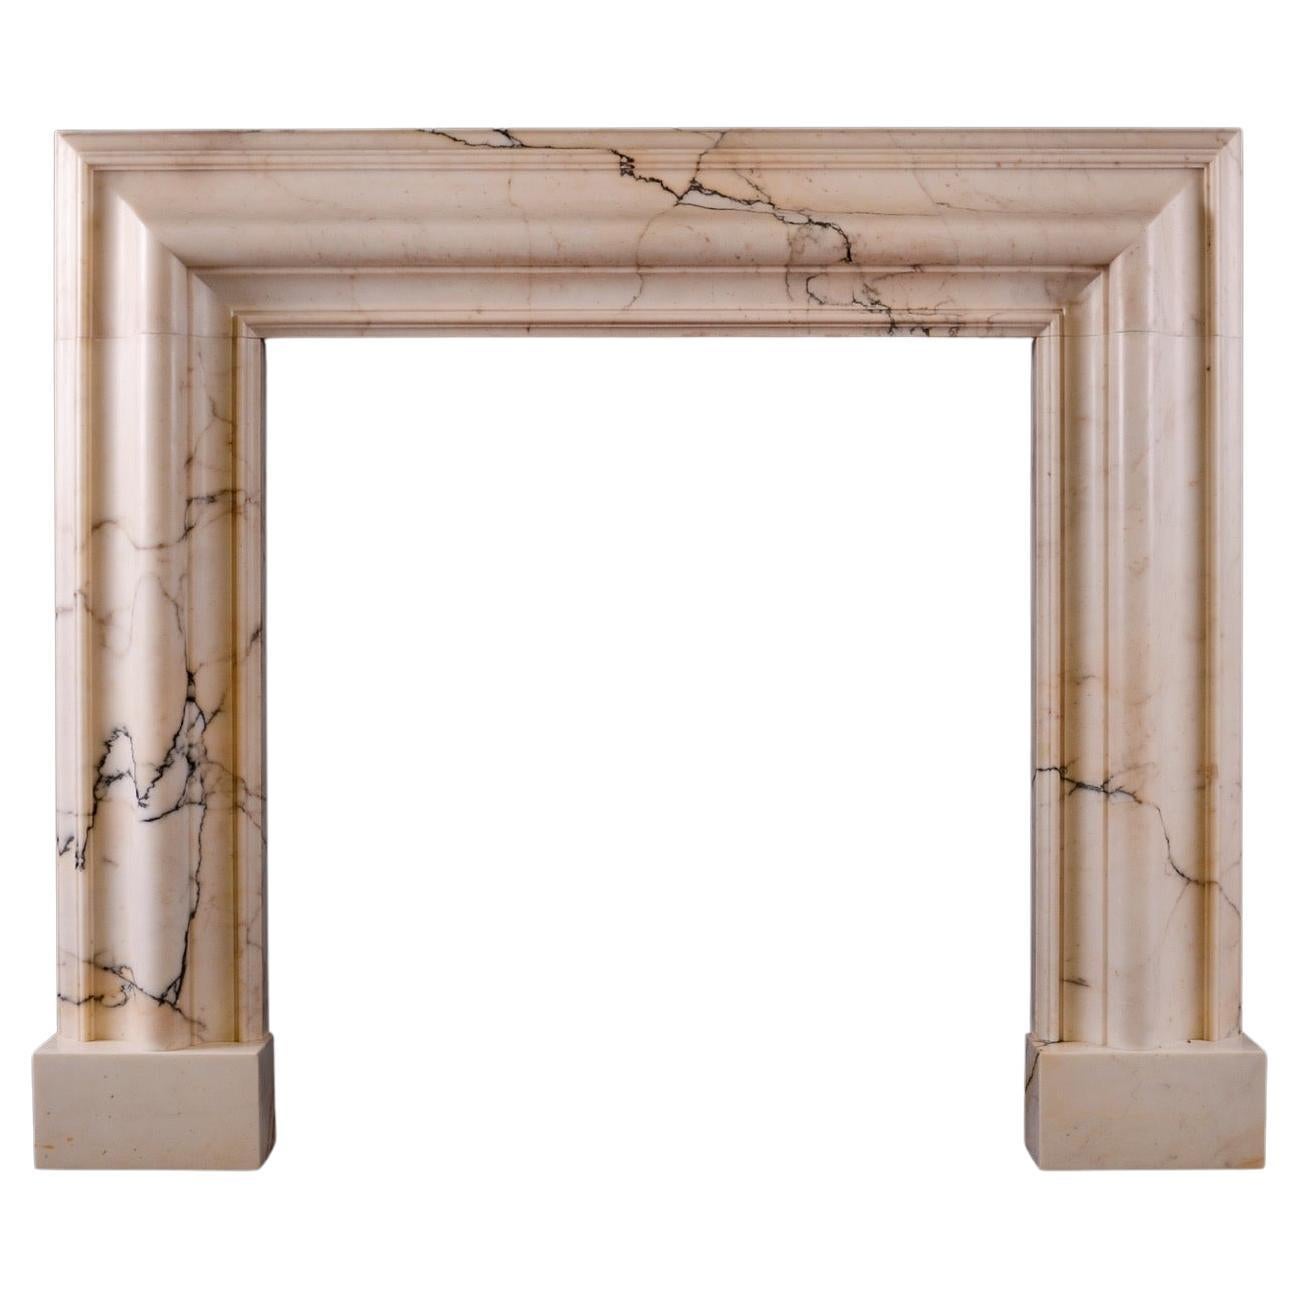 A Bolection Fireplace in Povanazzo Marble